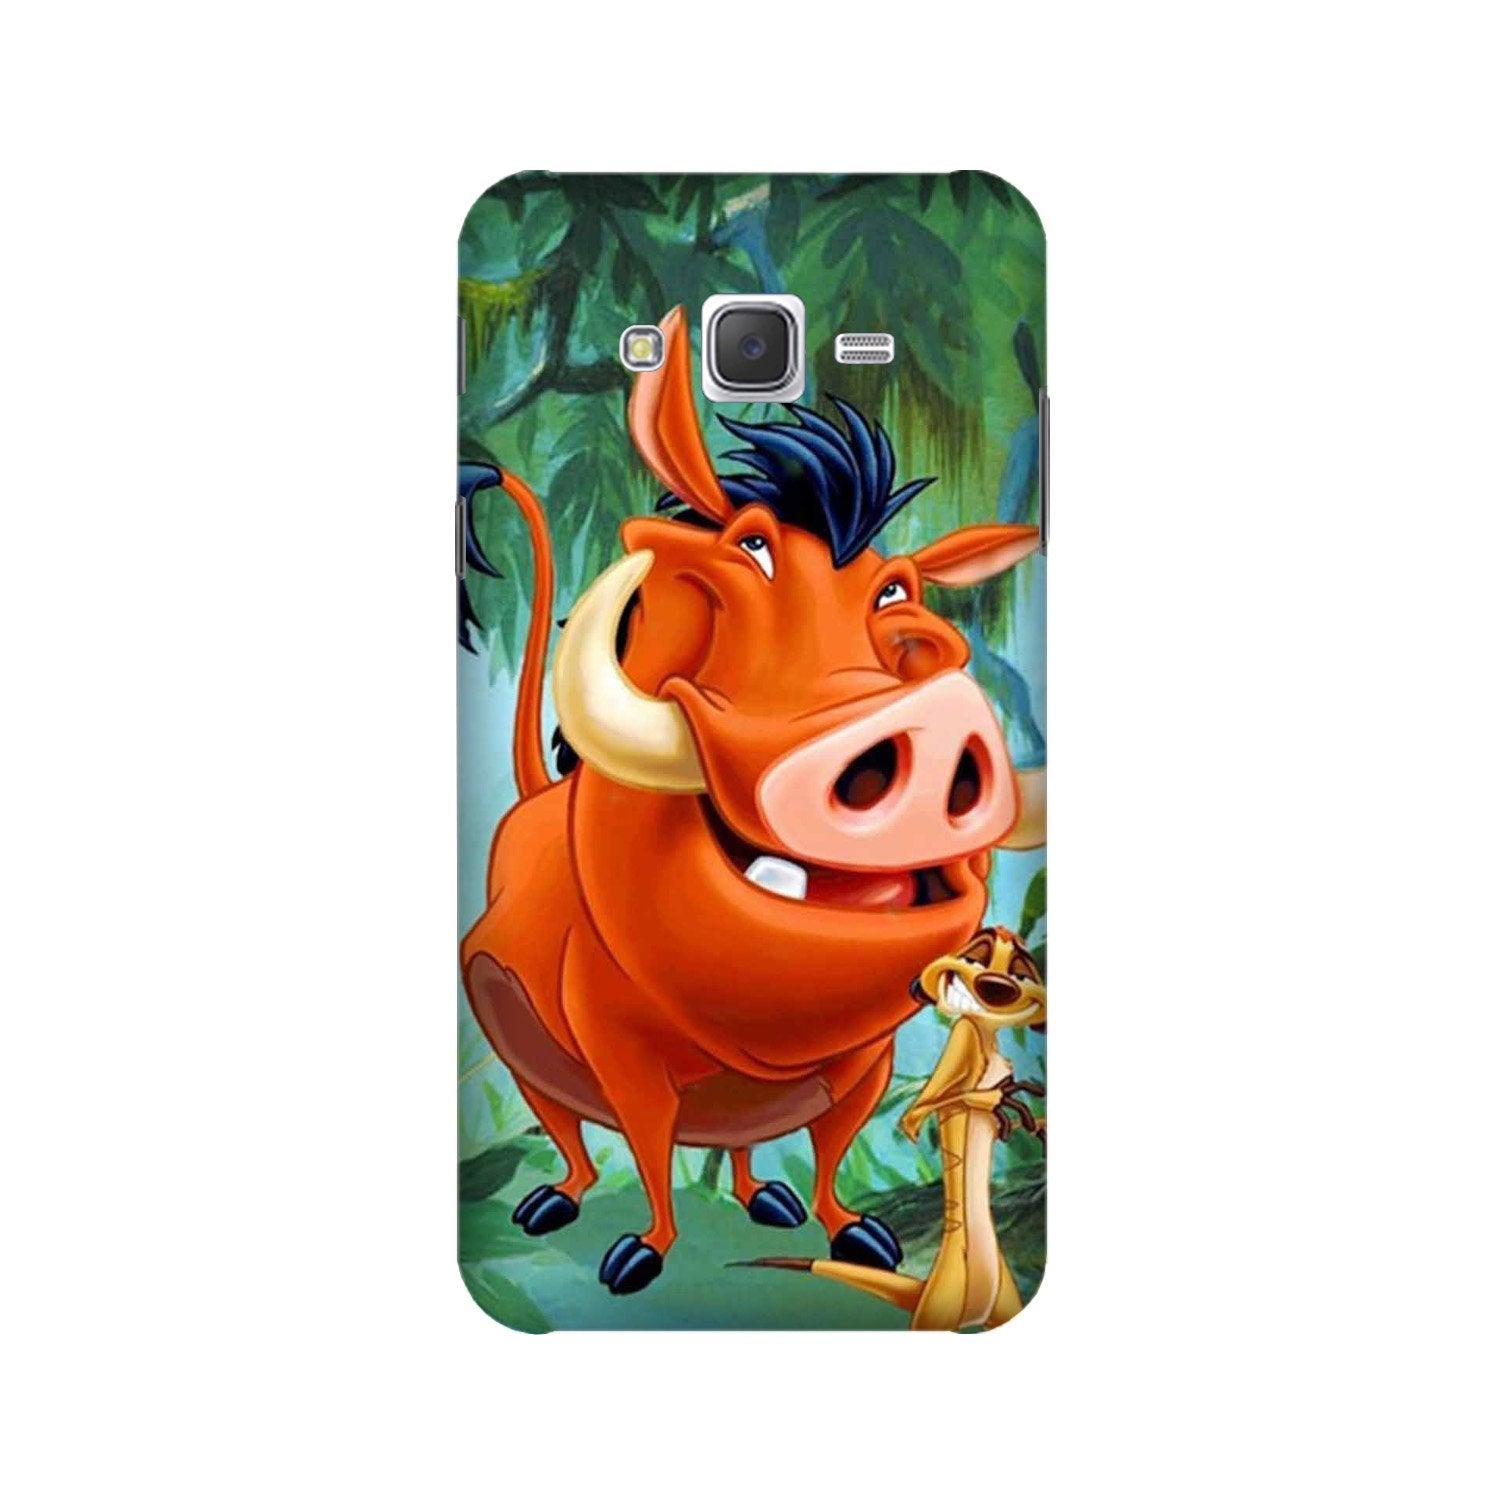 Timon and Pumbaa Mobile Back Case for Galaxy J3 (2015)  (Design - 305)